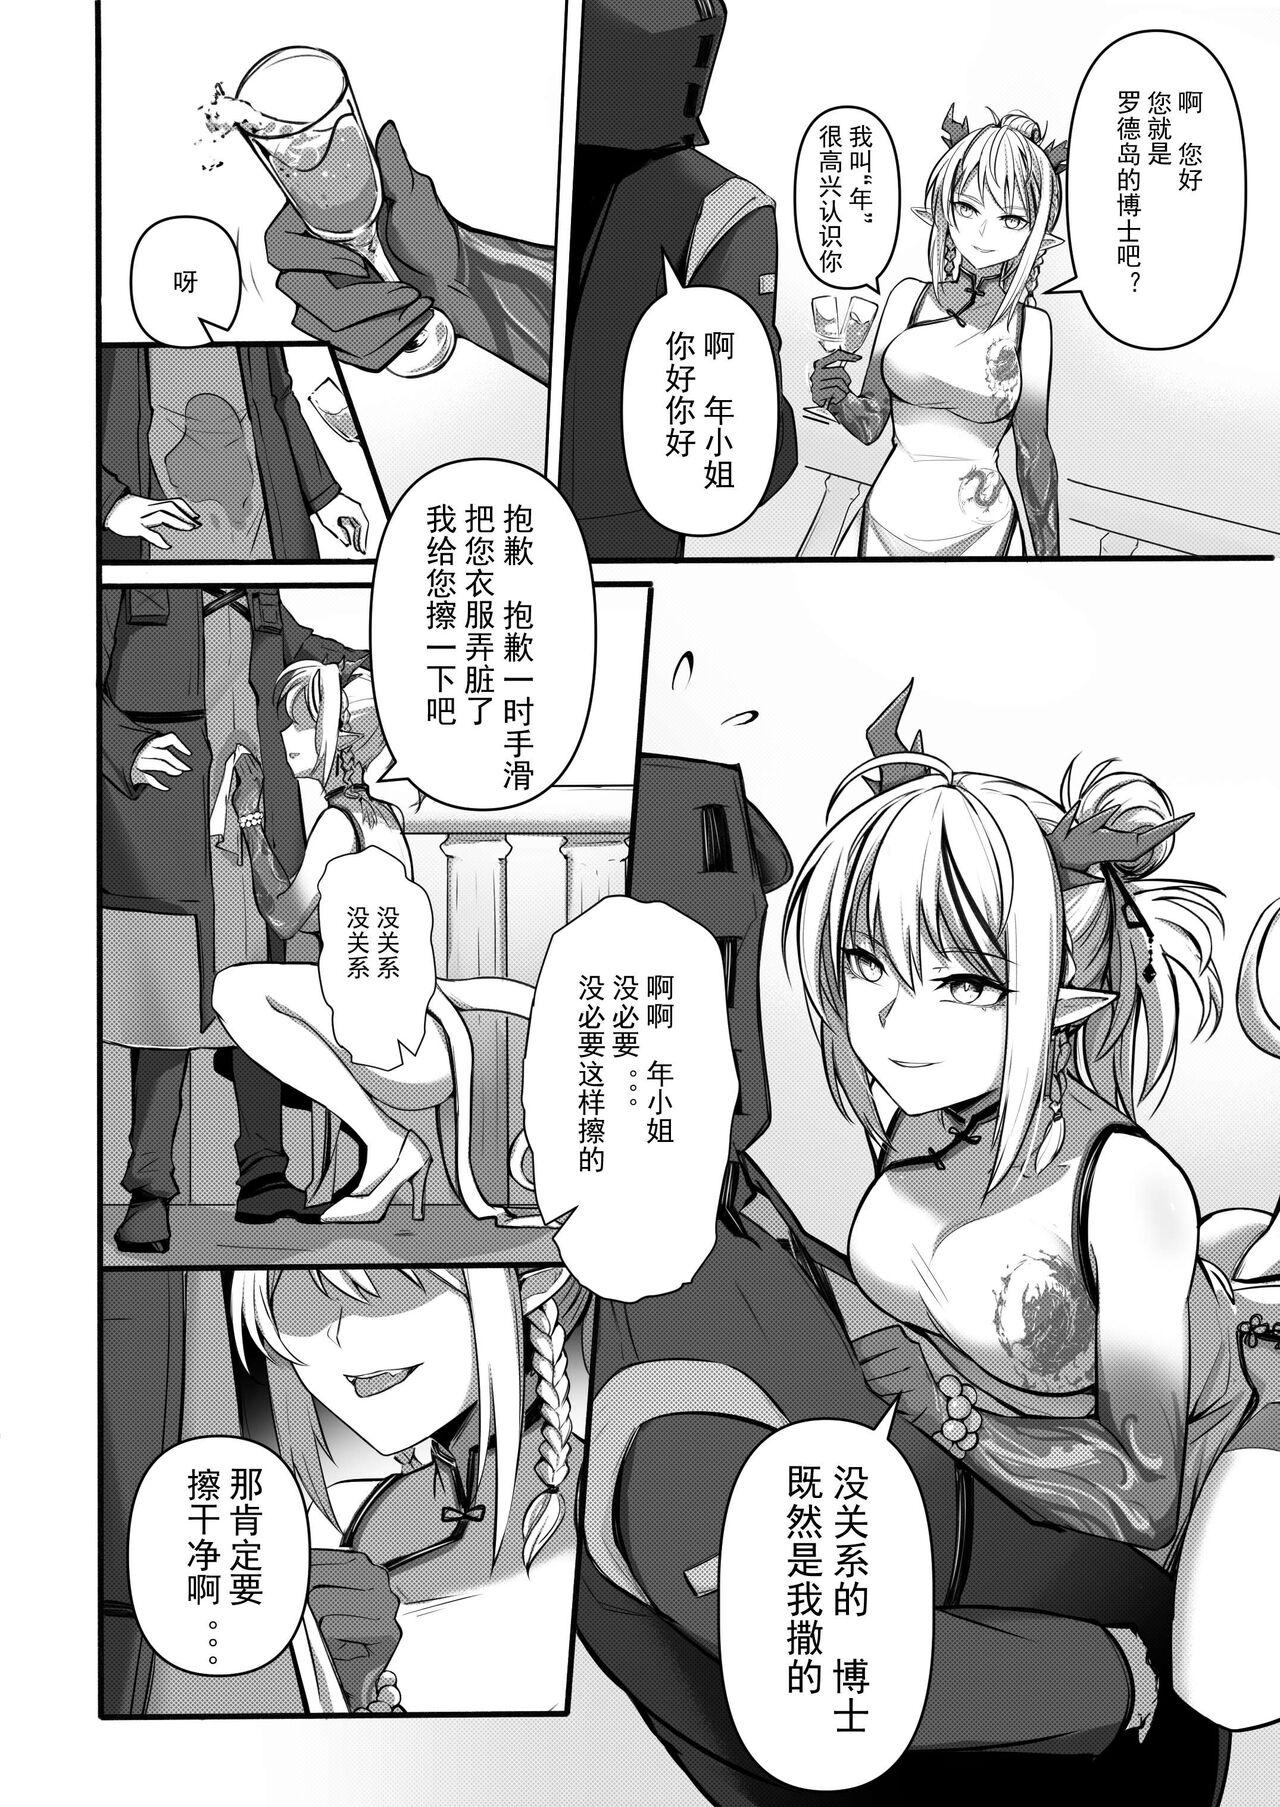 Naked Women Fucking 干员性爱秘闻录·年の欲情依存 - Arknights Girl On Girl - Page 5